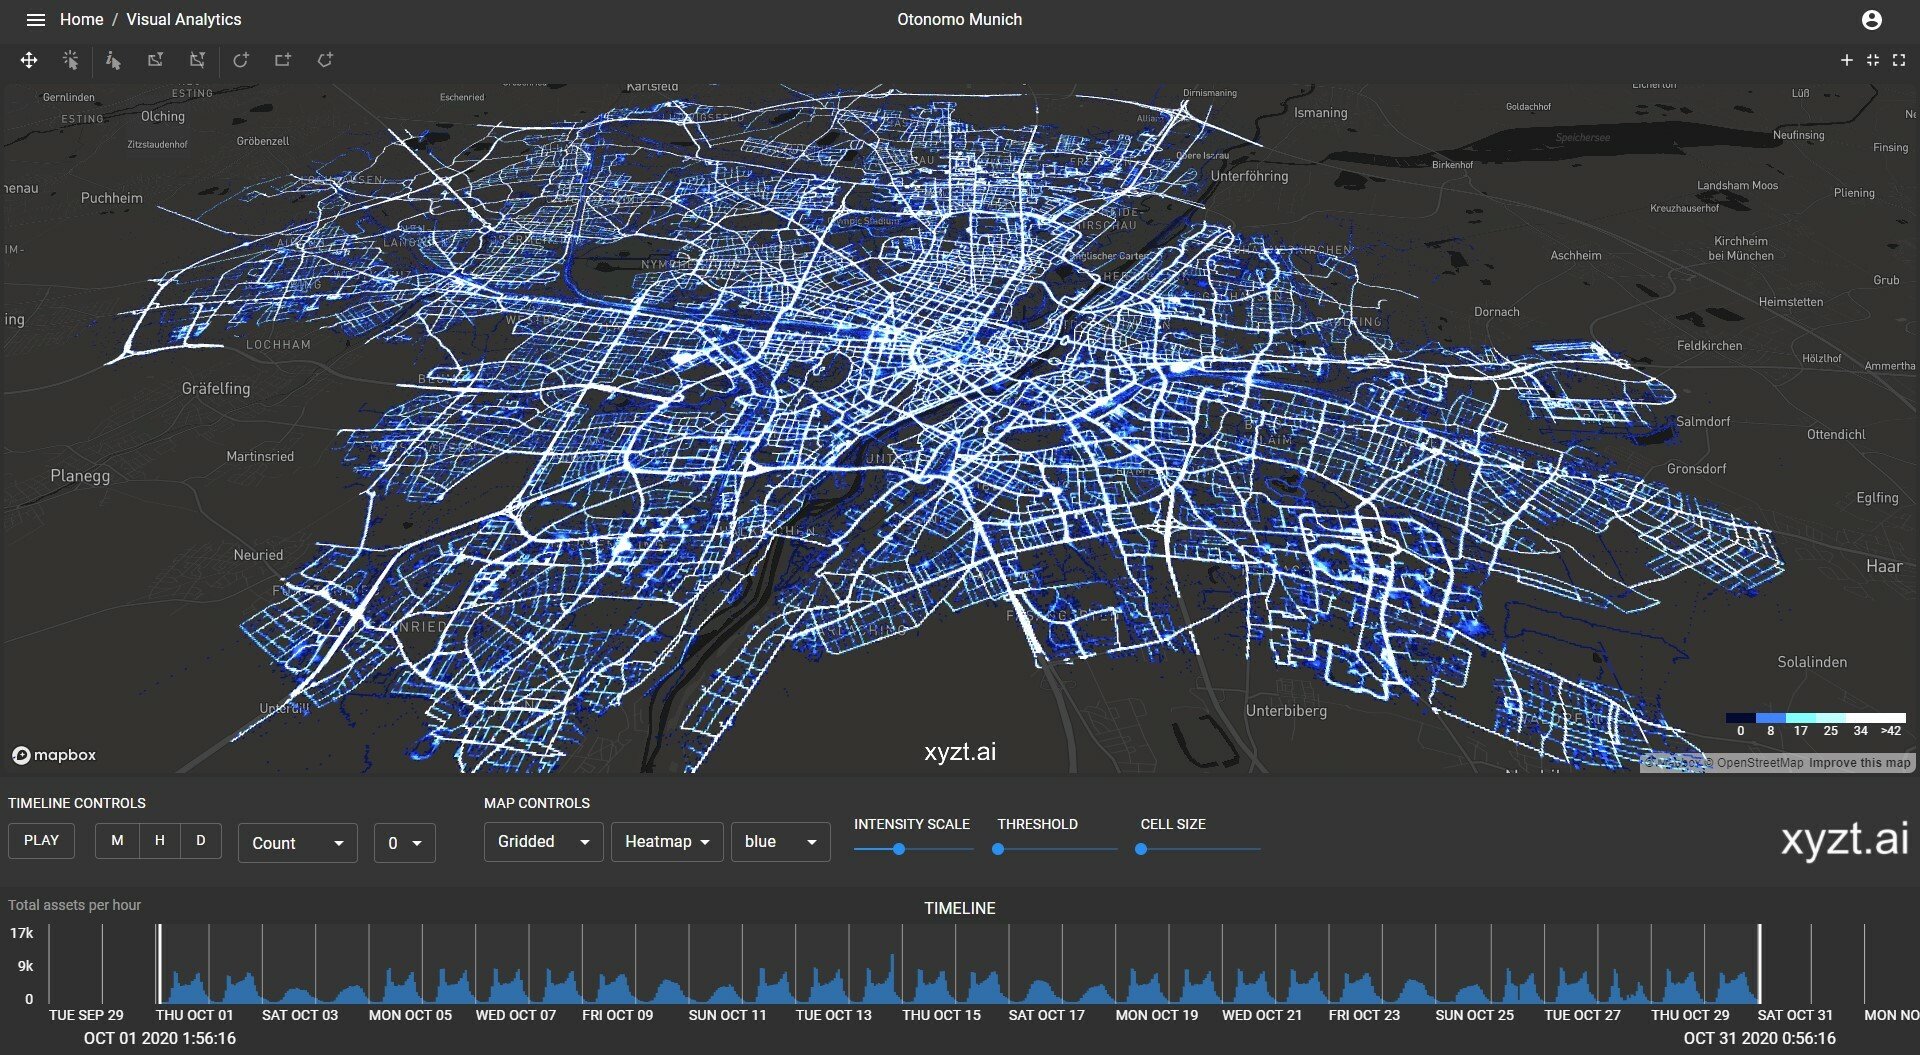 Traffic data in Munich visualized on a heatmap and timeline.